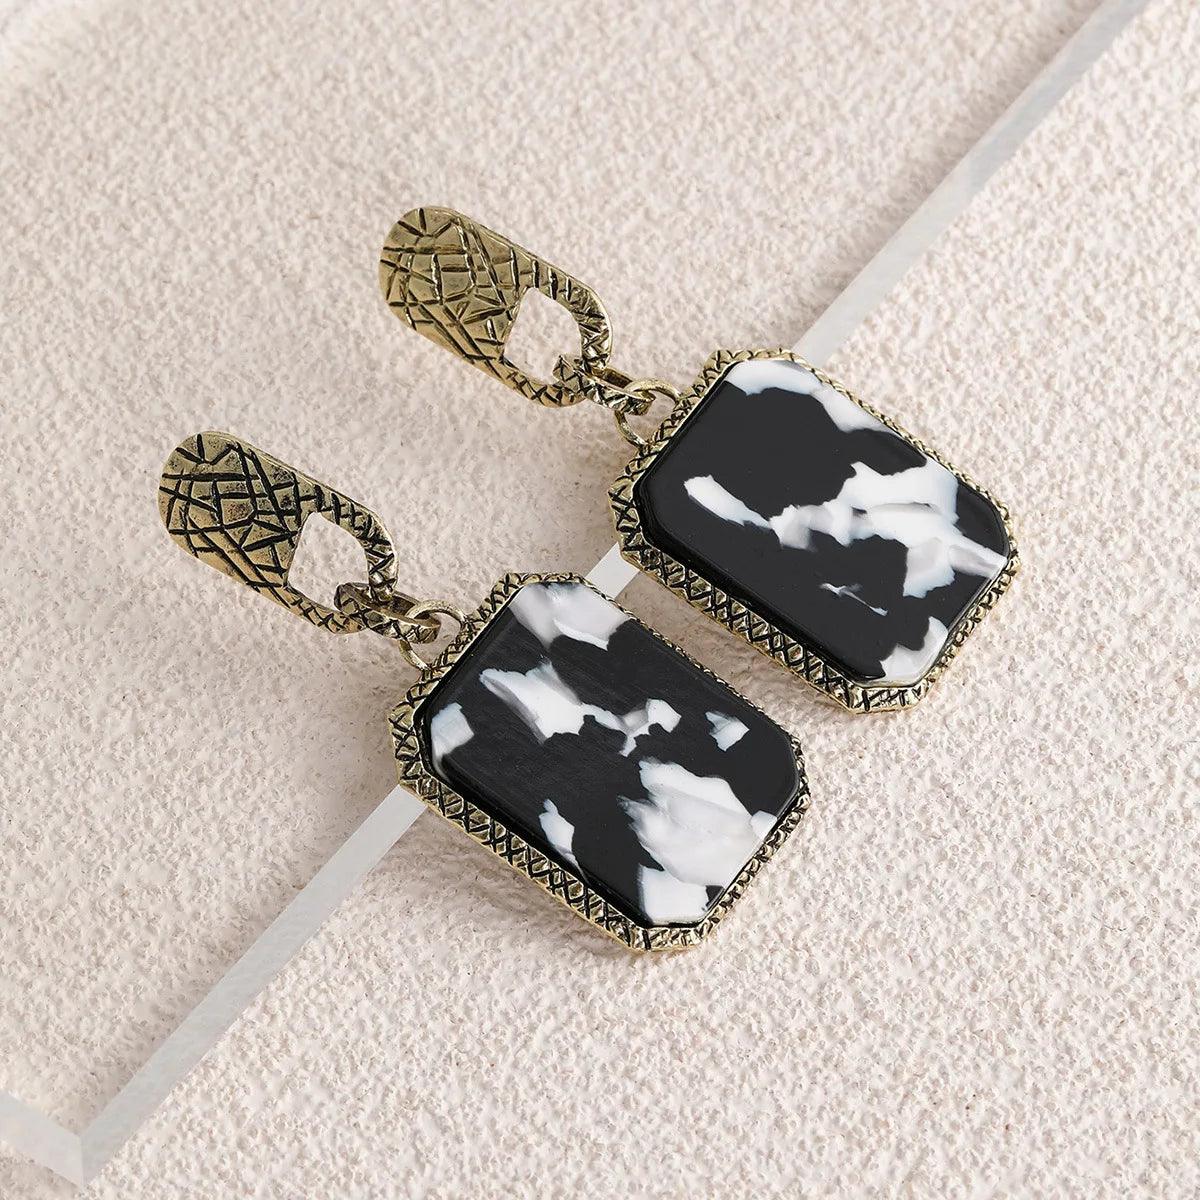 Earrings Charm Jewelry Geometric Square Leopard ET403 - Touchy Style